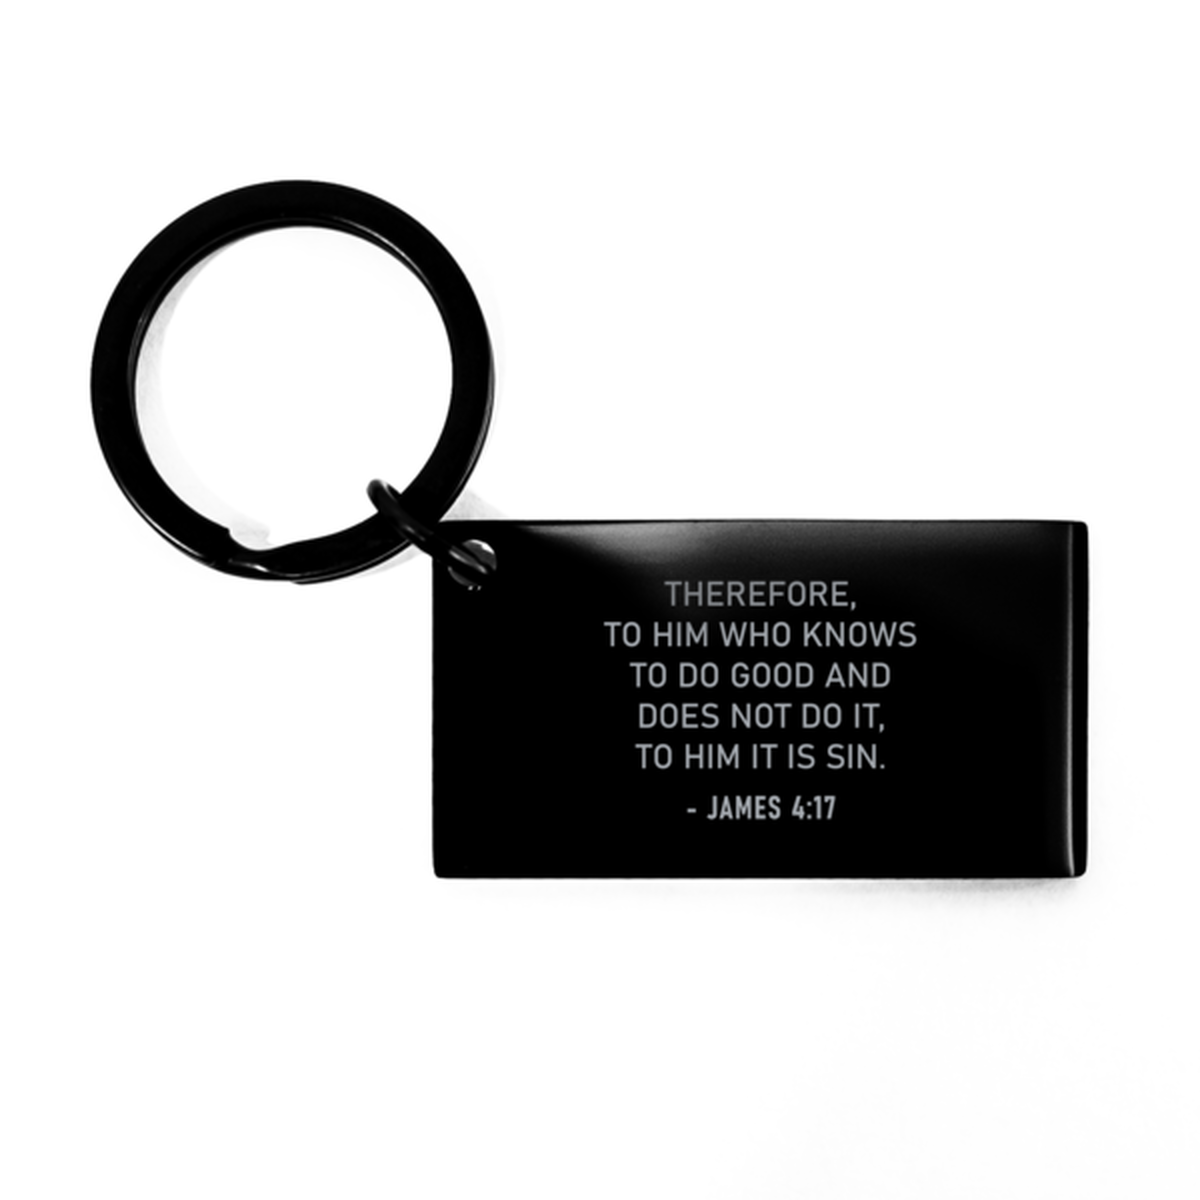 Bible Verse Black Keychain, James 4:17 Therefore, To Him Who Knows To Do Good And Does, Christian Inspirational Key Ring Gifts For Men Women